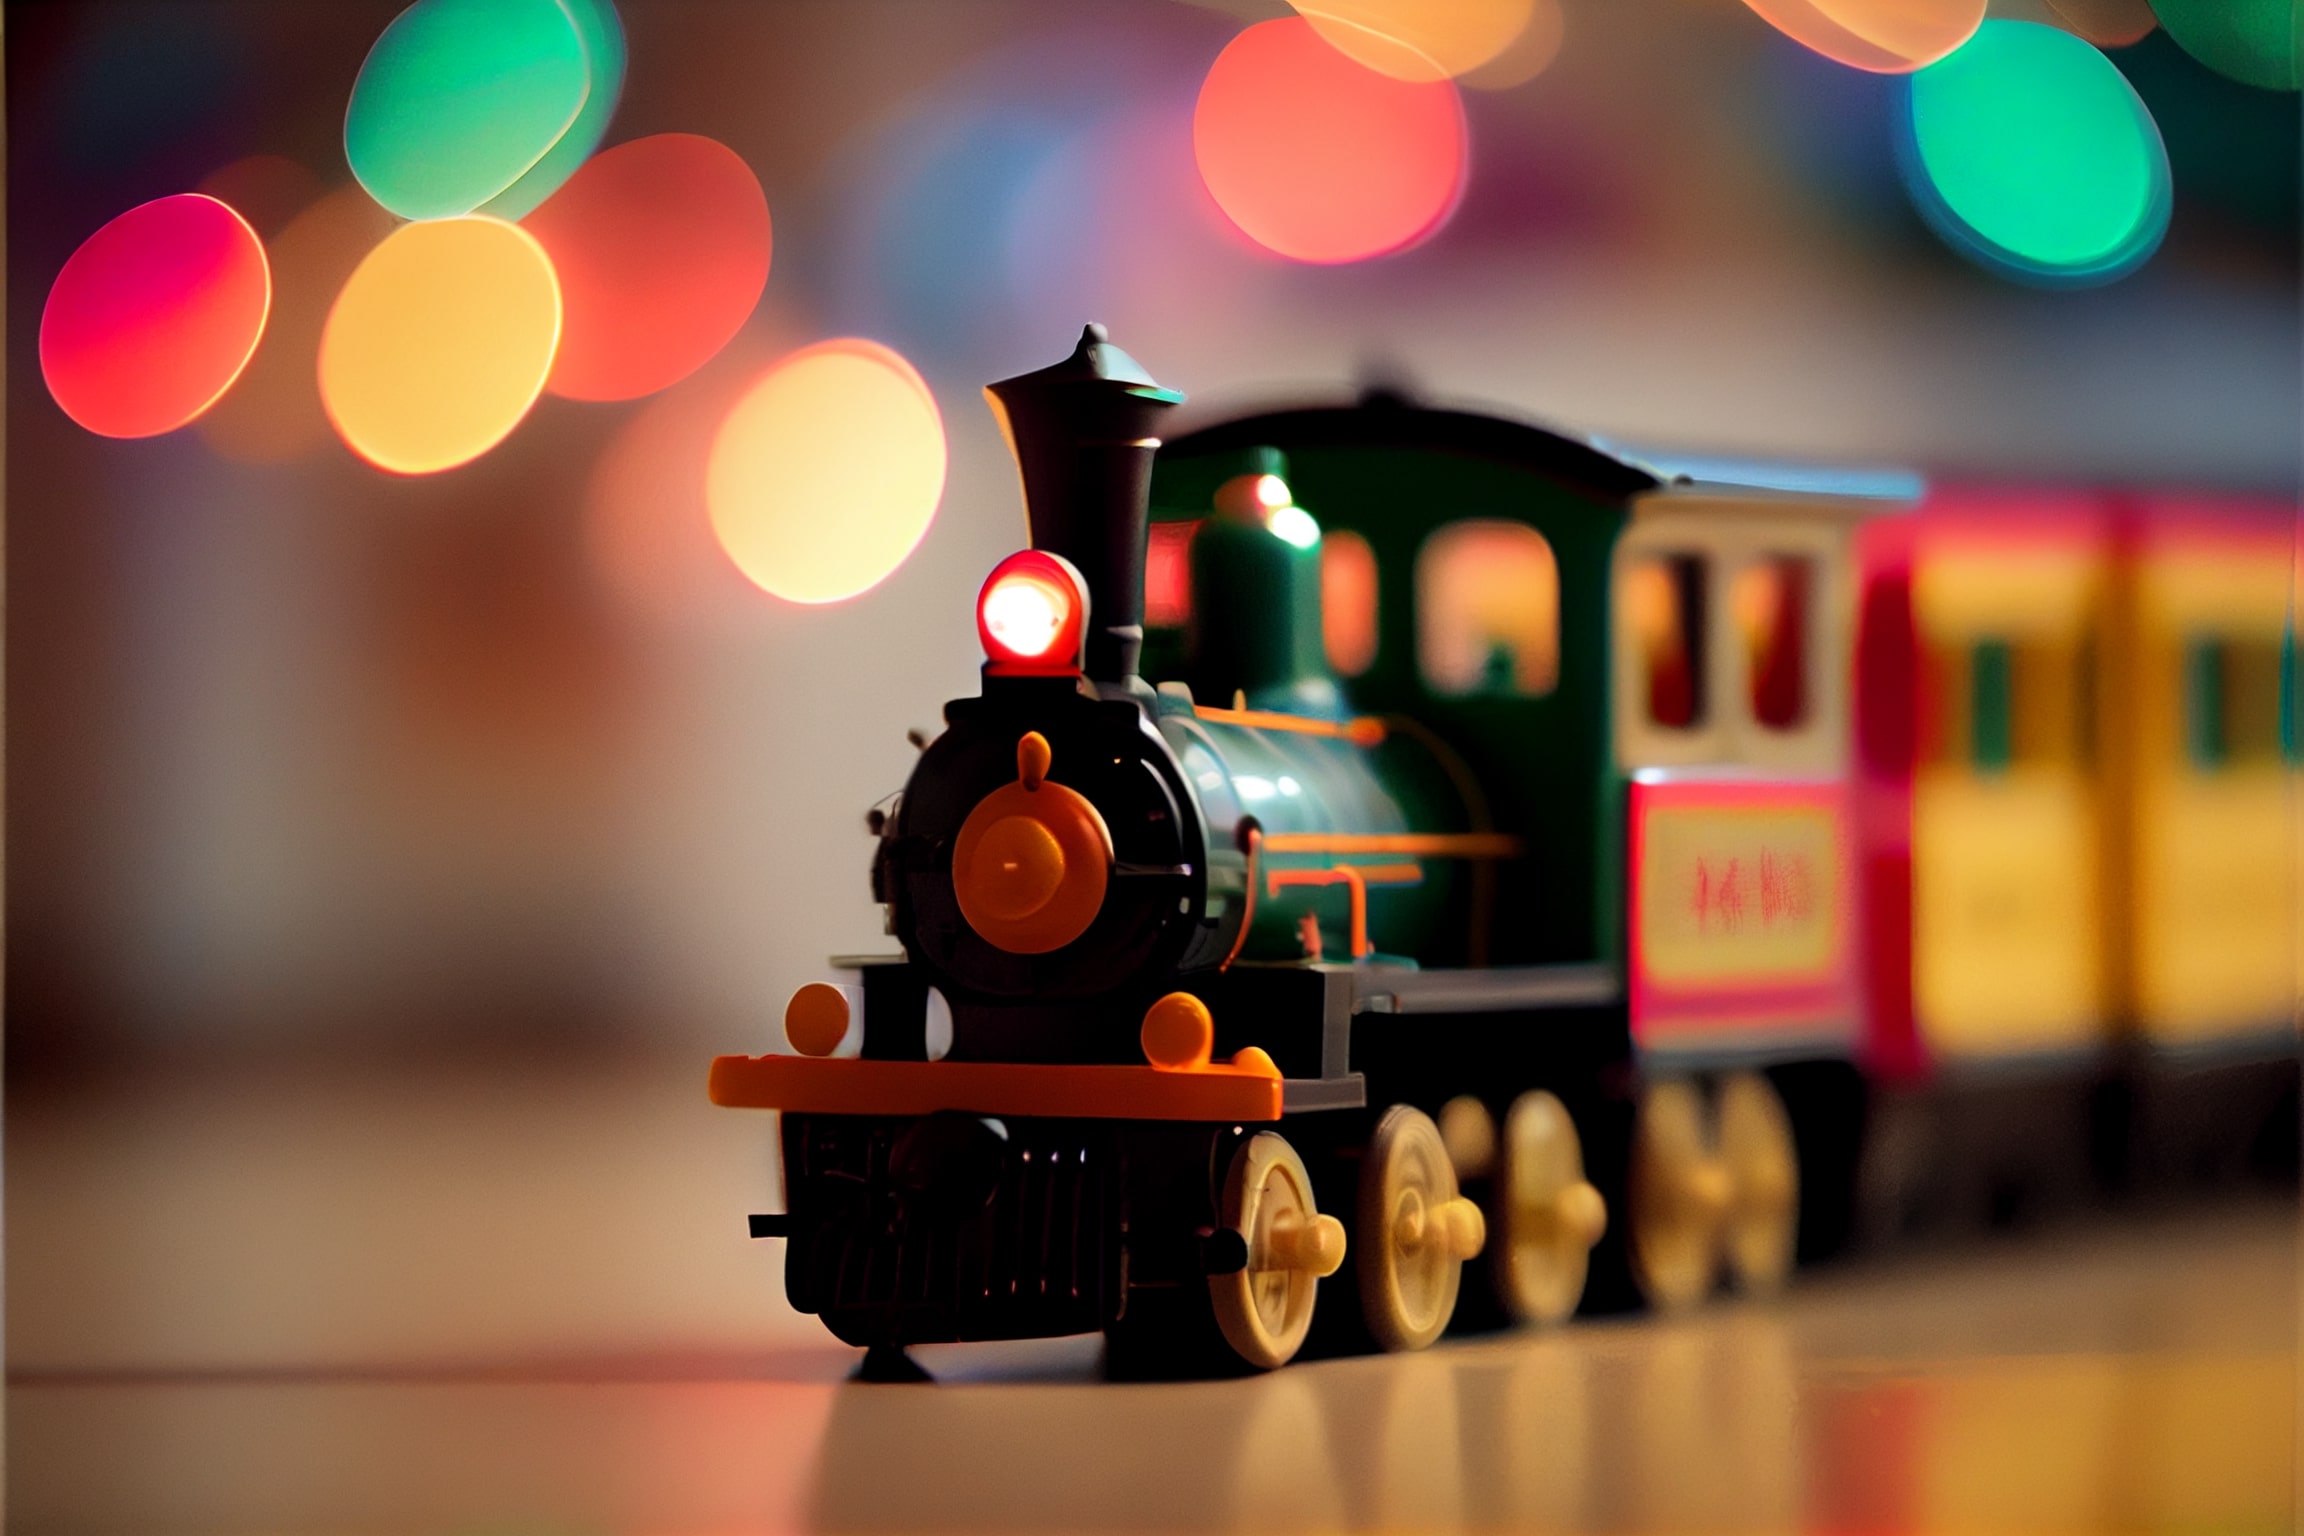 digitaldoodles a photo of a toy train in a room photo captured 7eeb2f34 7611 4102 90d3 d1326ce78556 60